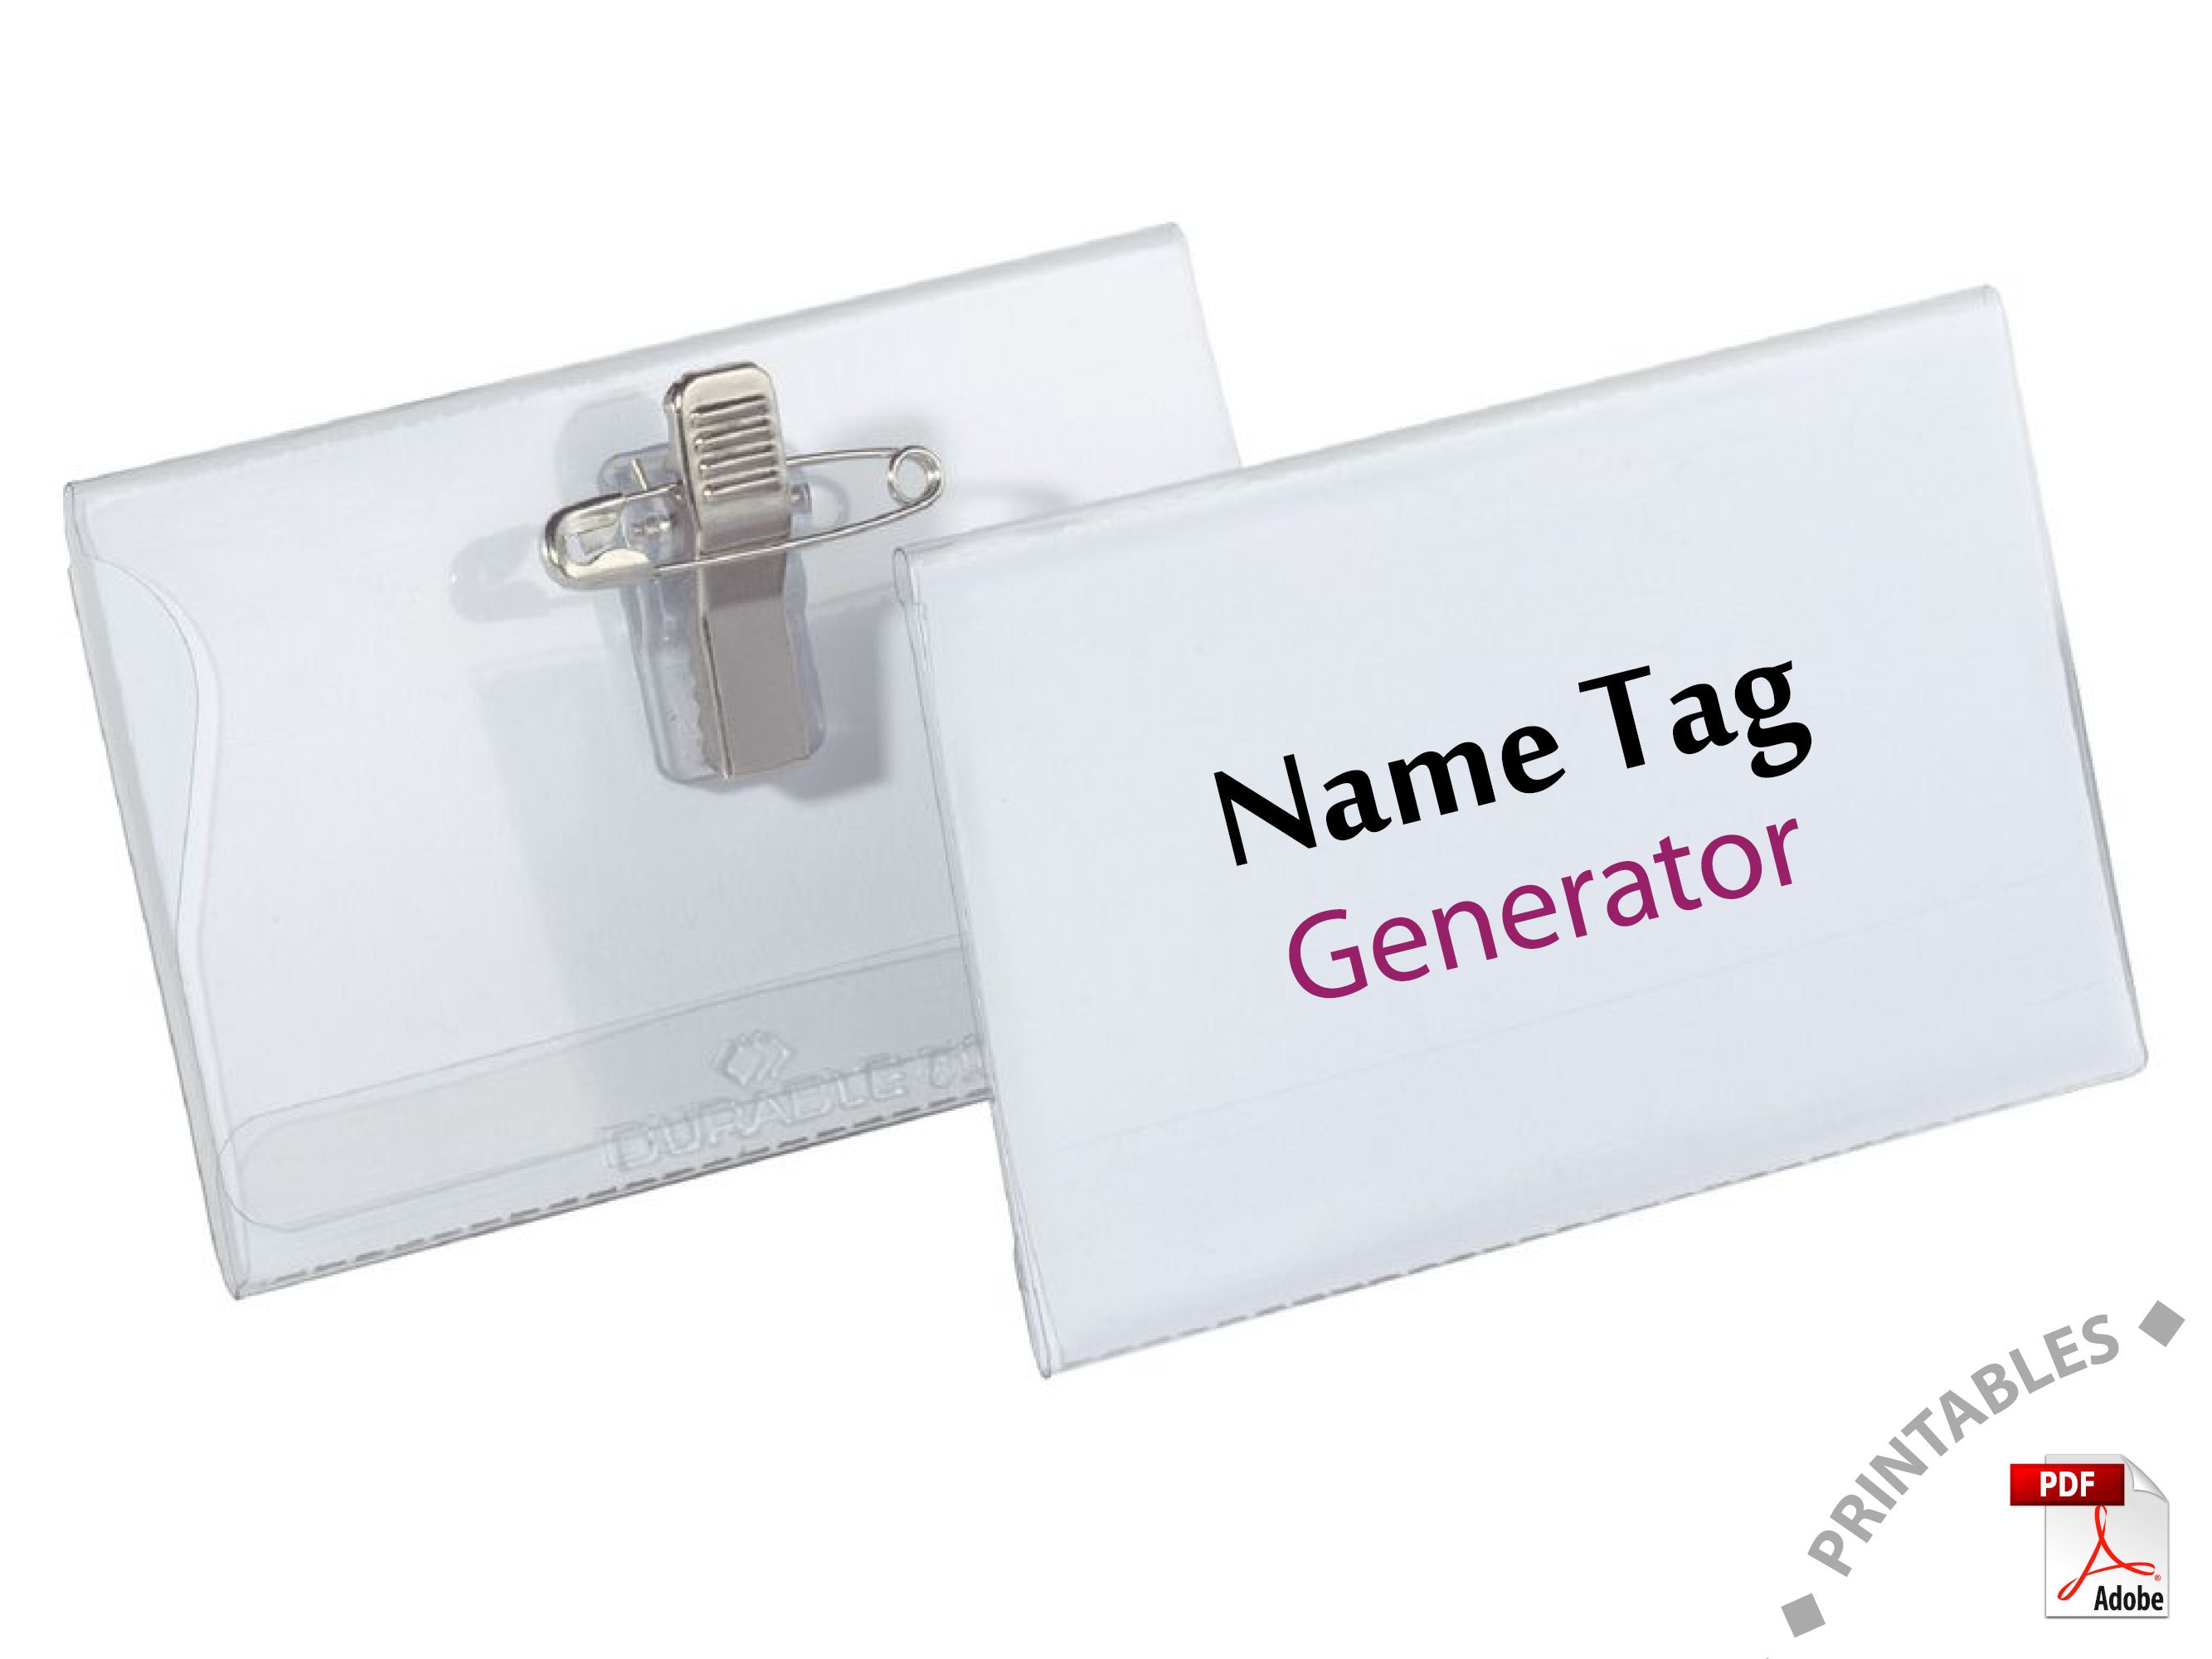 name tag maker, name tag maker Suppliers and Manufacturers at